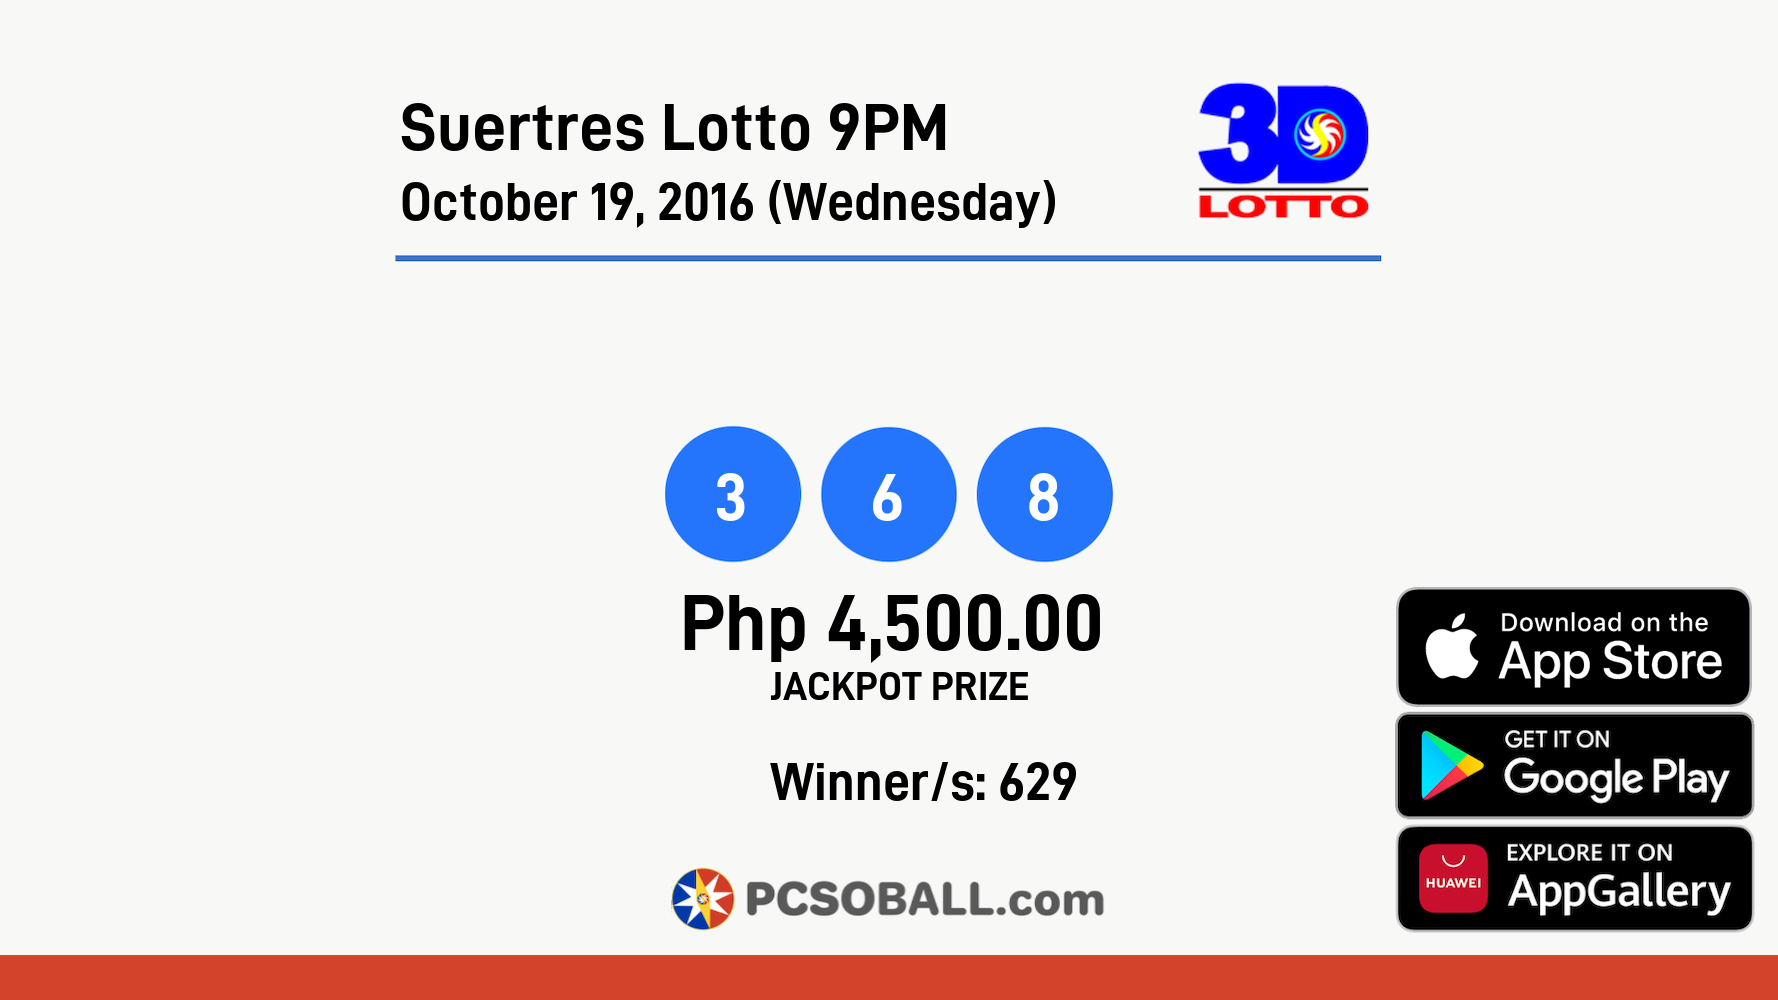 Suertres Lotto 9PM October 19, 2016 (Wednesday) Result